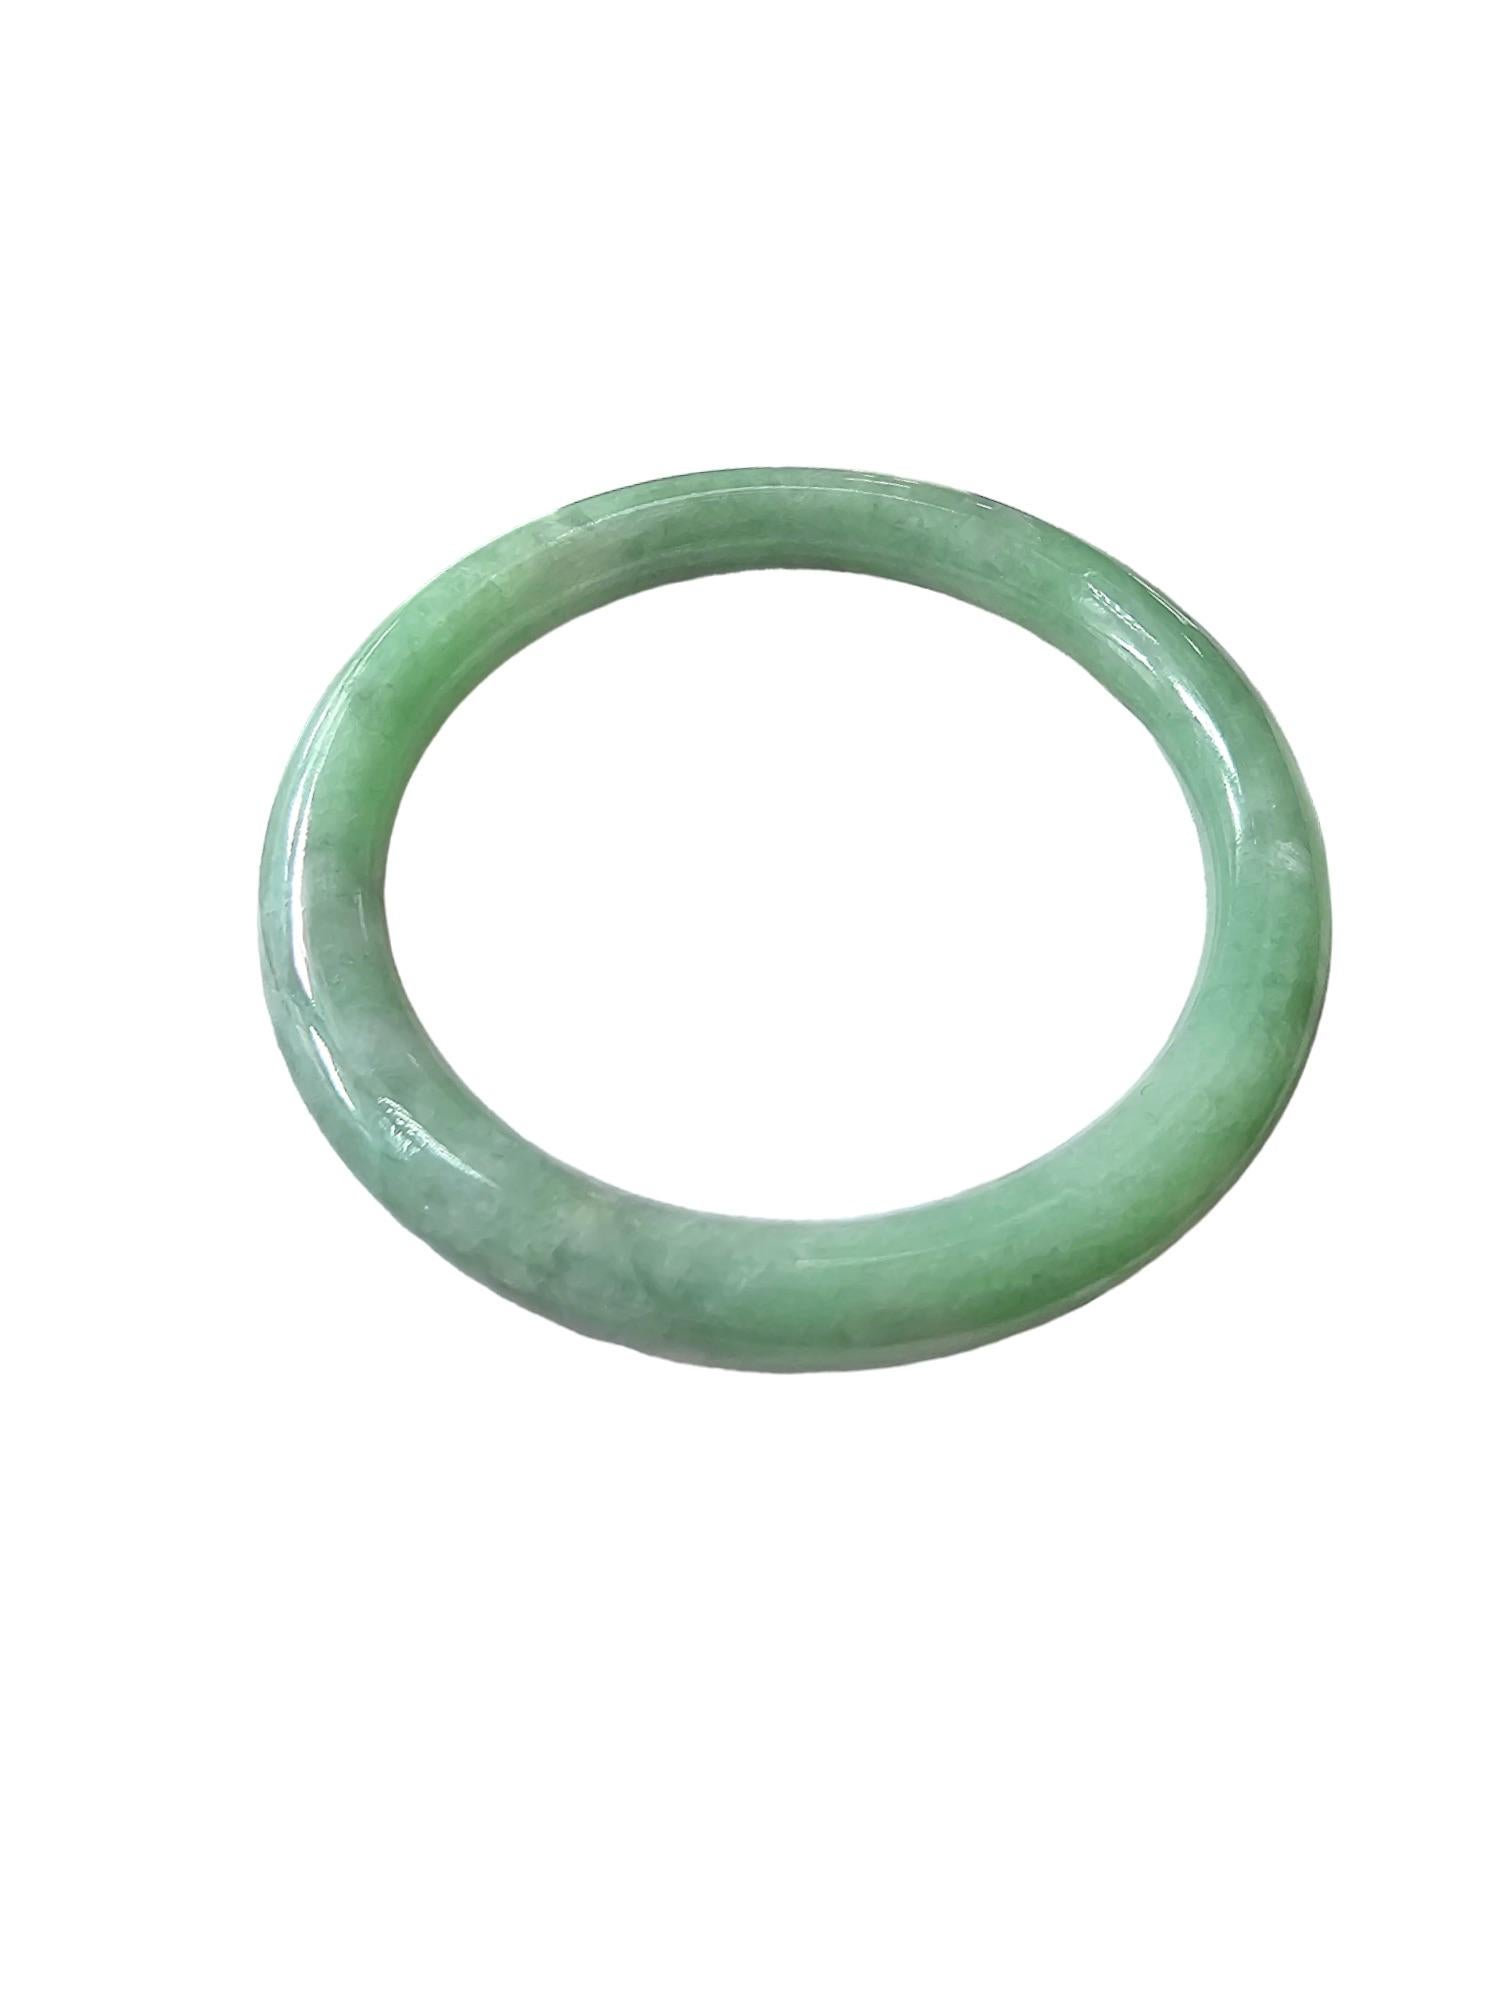 Burmese A-Jadeite Jade Bangle Bracelet; Green, Grey, White Jadeite 08809 - 100% designed, crafted, made and finished in Hong Kong. Handmade and Machine-quality checked.

Our 'Earth's' Bangle Bracelets are all one-of-one pieces;

This piece is famed